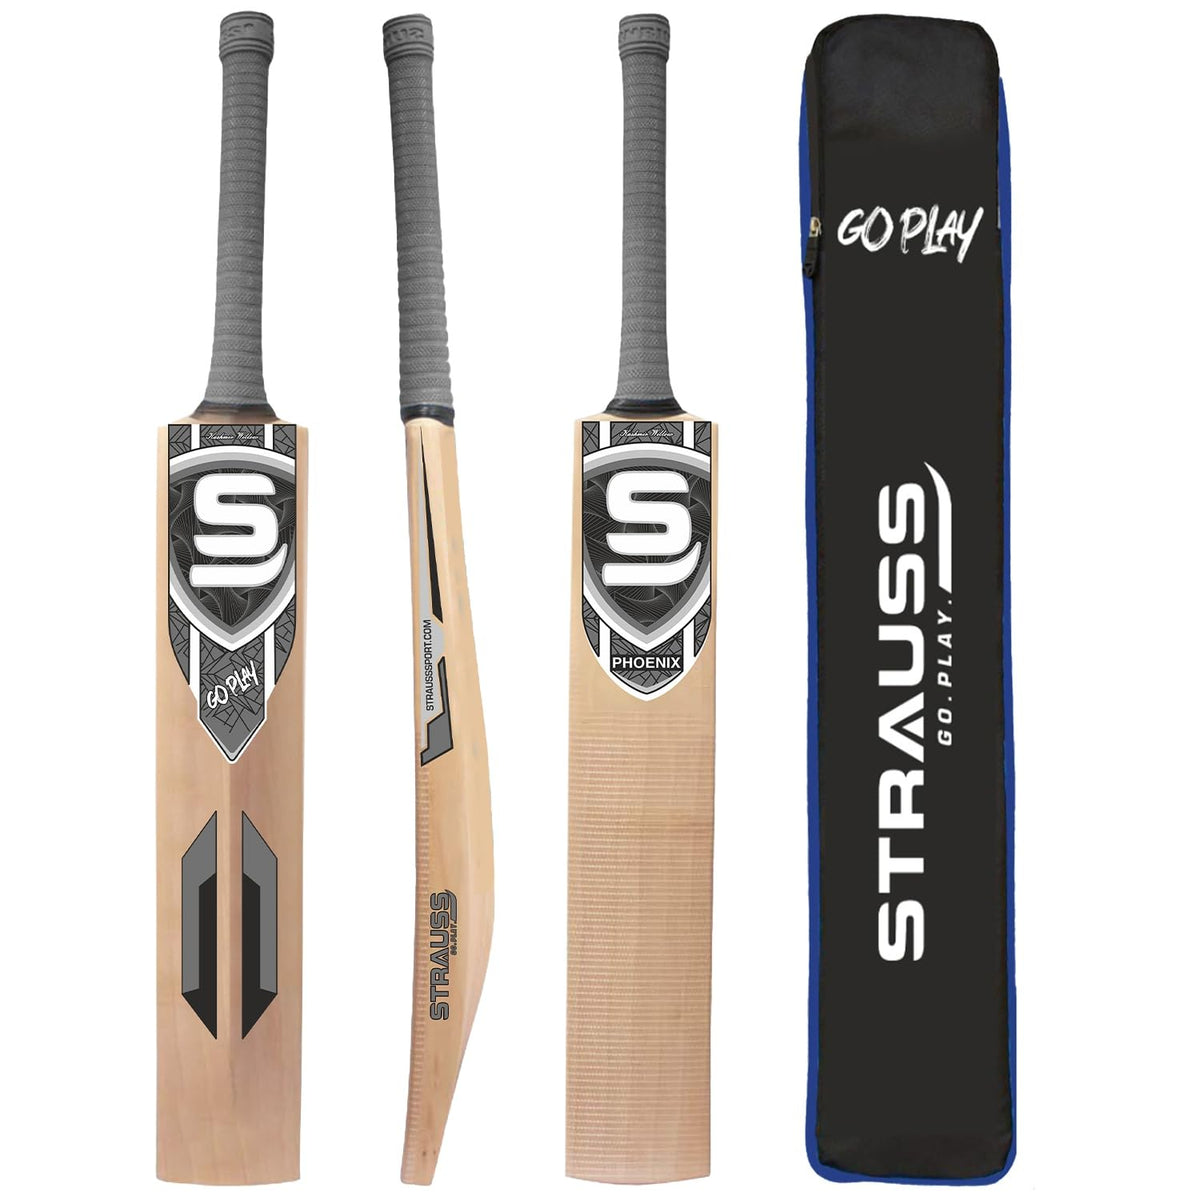 STRAUSS Phoenix Kashmir Willow Cricket Bat |Size: Short Hand |Grey| Suitable for Leather Ball |Ideal for Boys/Youth/Adults (1050-1200 Grams)